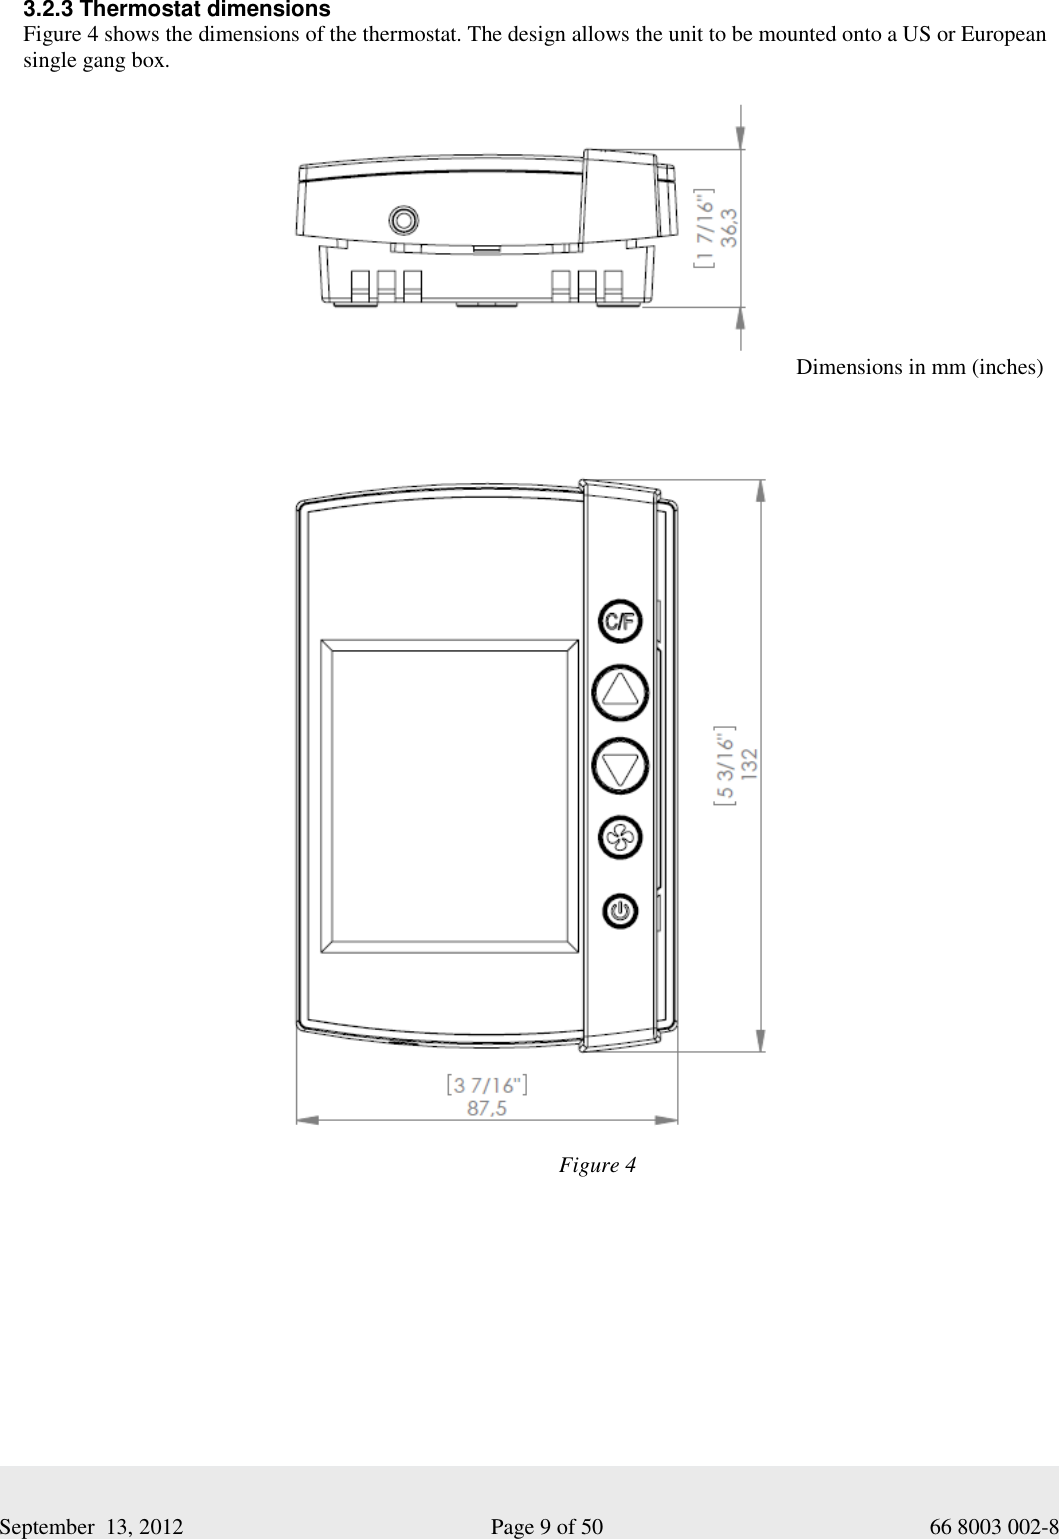     September  13, 2012                                                      Page 9 of 50                                           66 8003 002-8  3.2.3 Thermostat dimensions Figure 4 shows the dimensions of the thermostat. The design allows the unit to be mounted onto a US or European single gang box.   Dimensions in mm (inches) Figure 4 